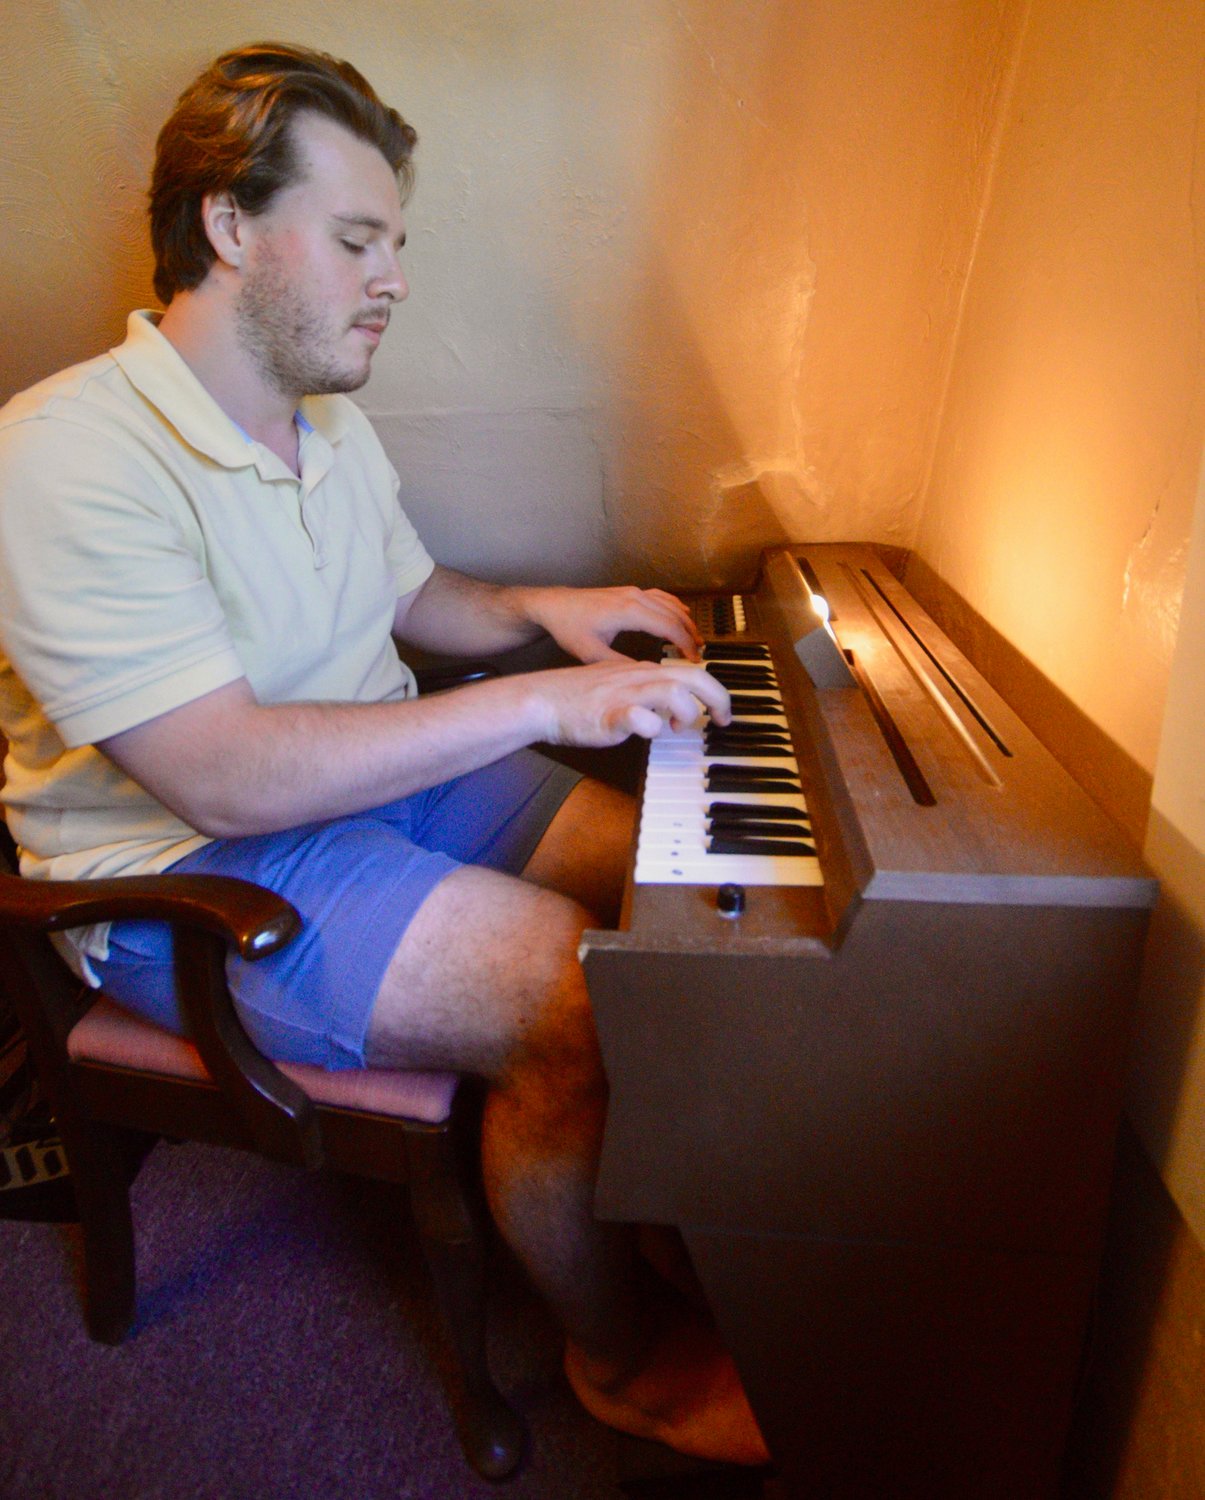 Nicholas Quigley, who teaches music to grades 5-8 at Atlantis Charter School in Fall River, plays a vintage chord organ at his Bristol Ferry Road apartment last week. The instrument, a smaller version of a regular organ, was popular in the ’60s and ’70s.